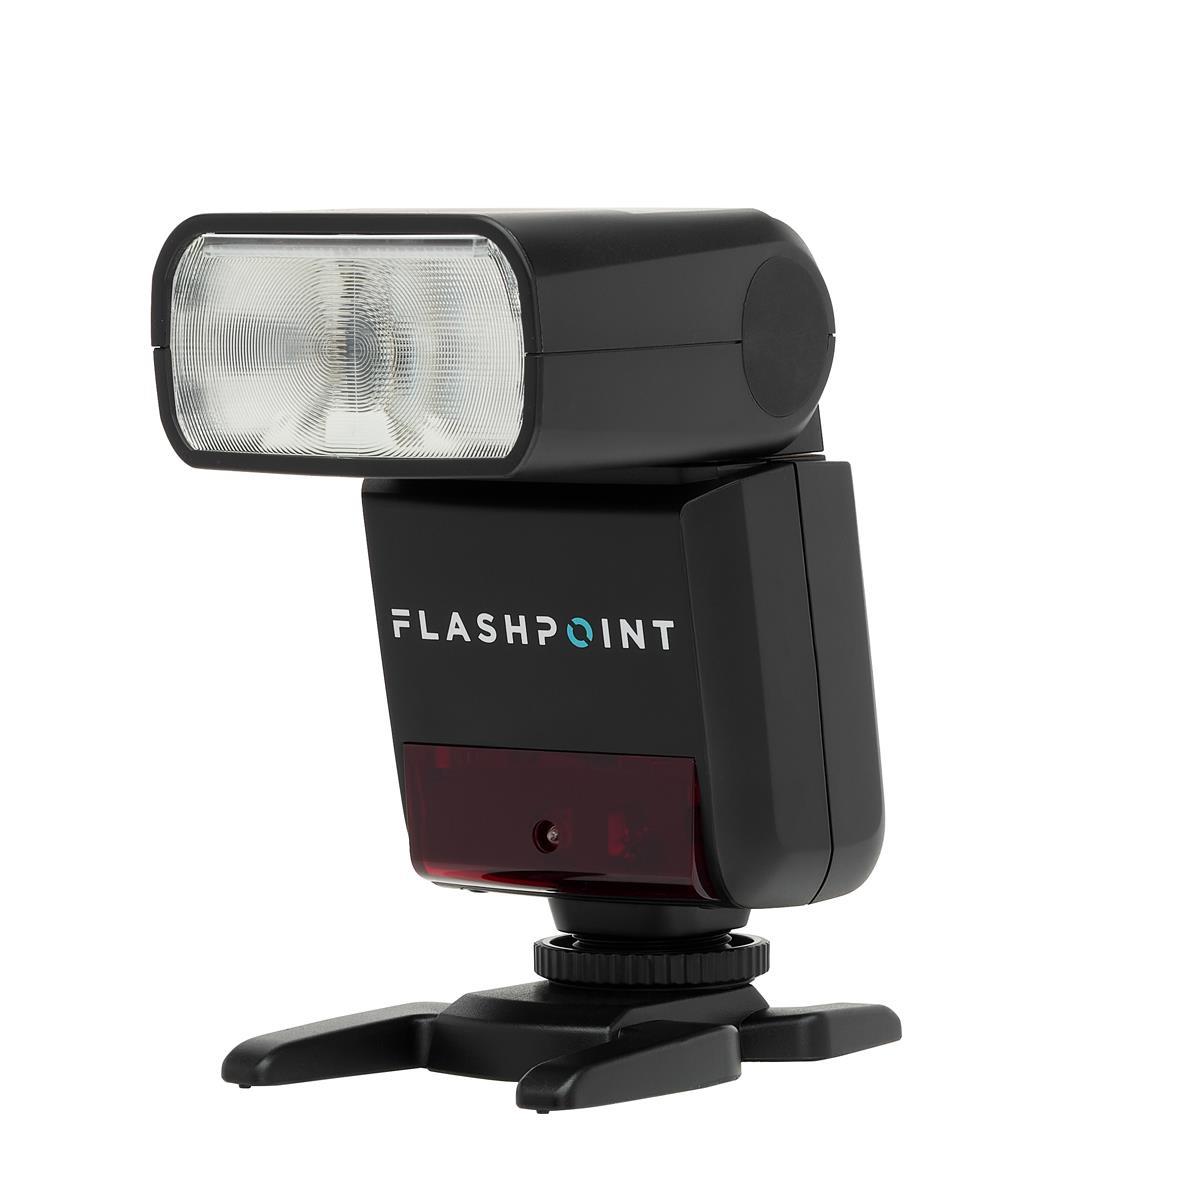 Image of Flashpoint Zoom-Mini TTL R2 Flash for Nikon Compact Cameras